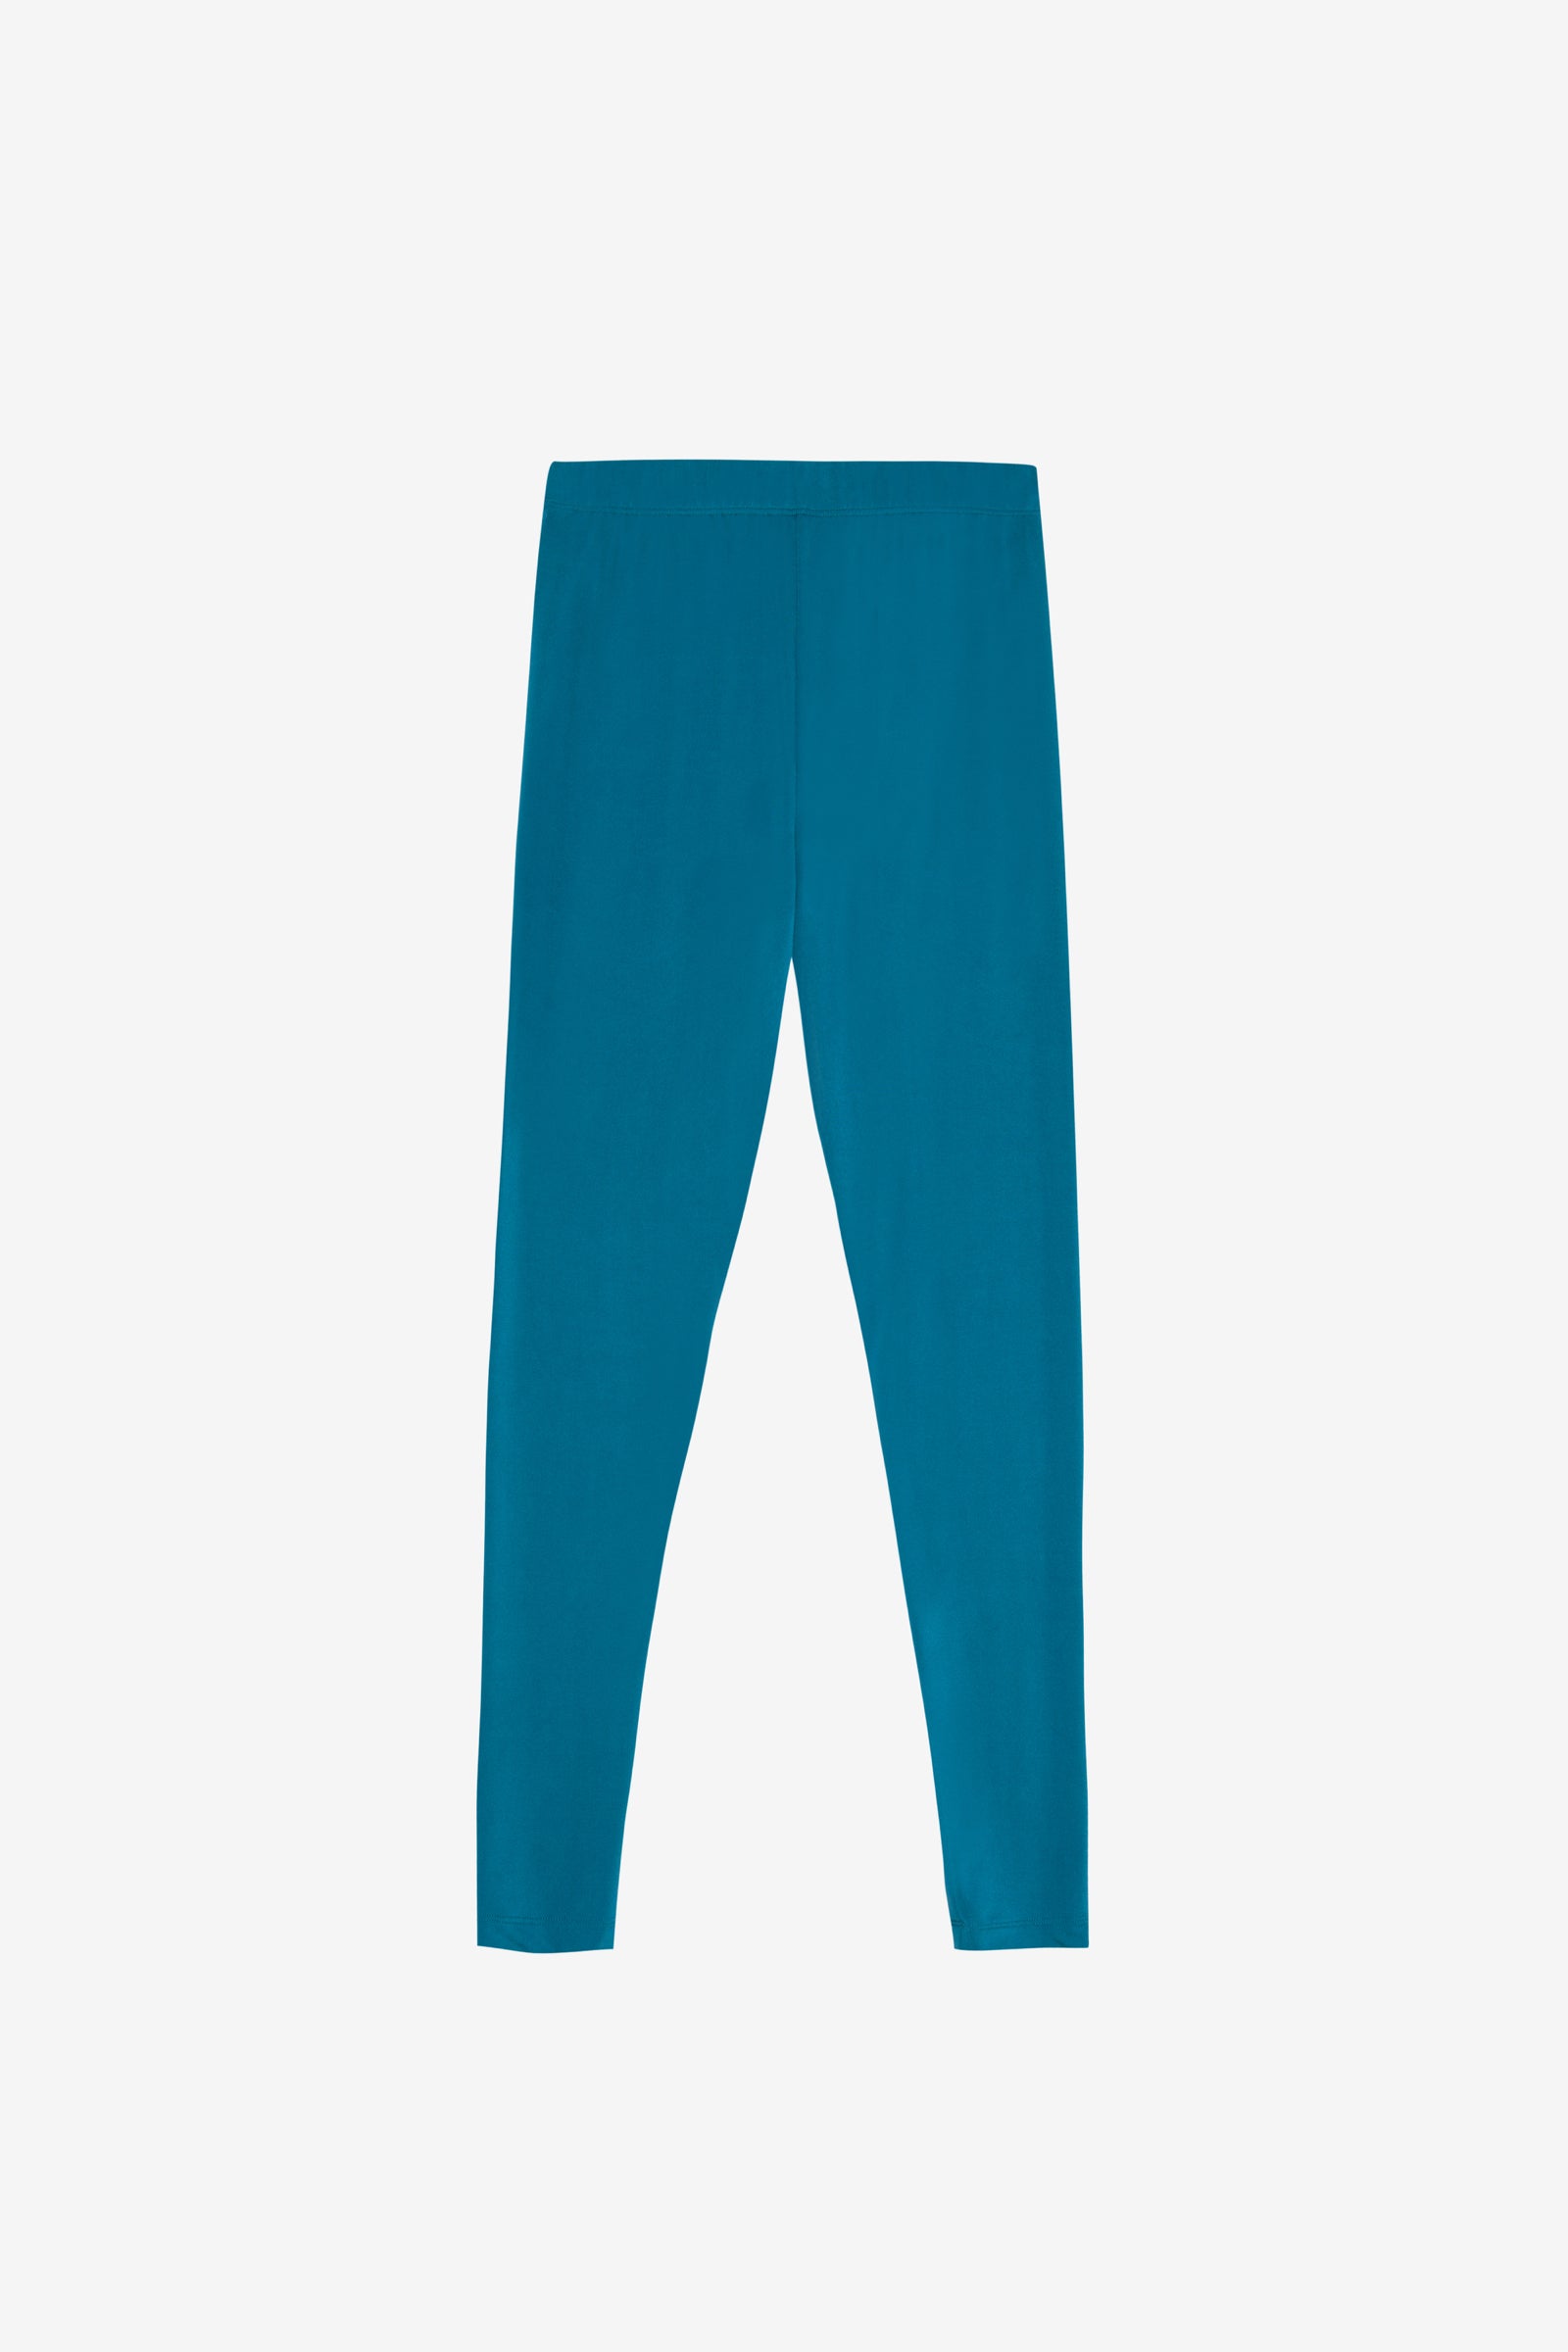 Teal Blue Fitted Leggings